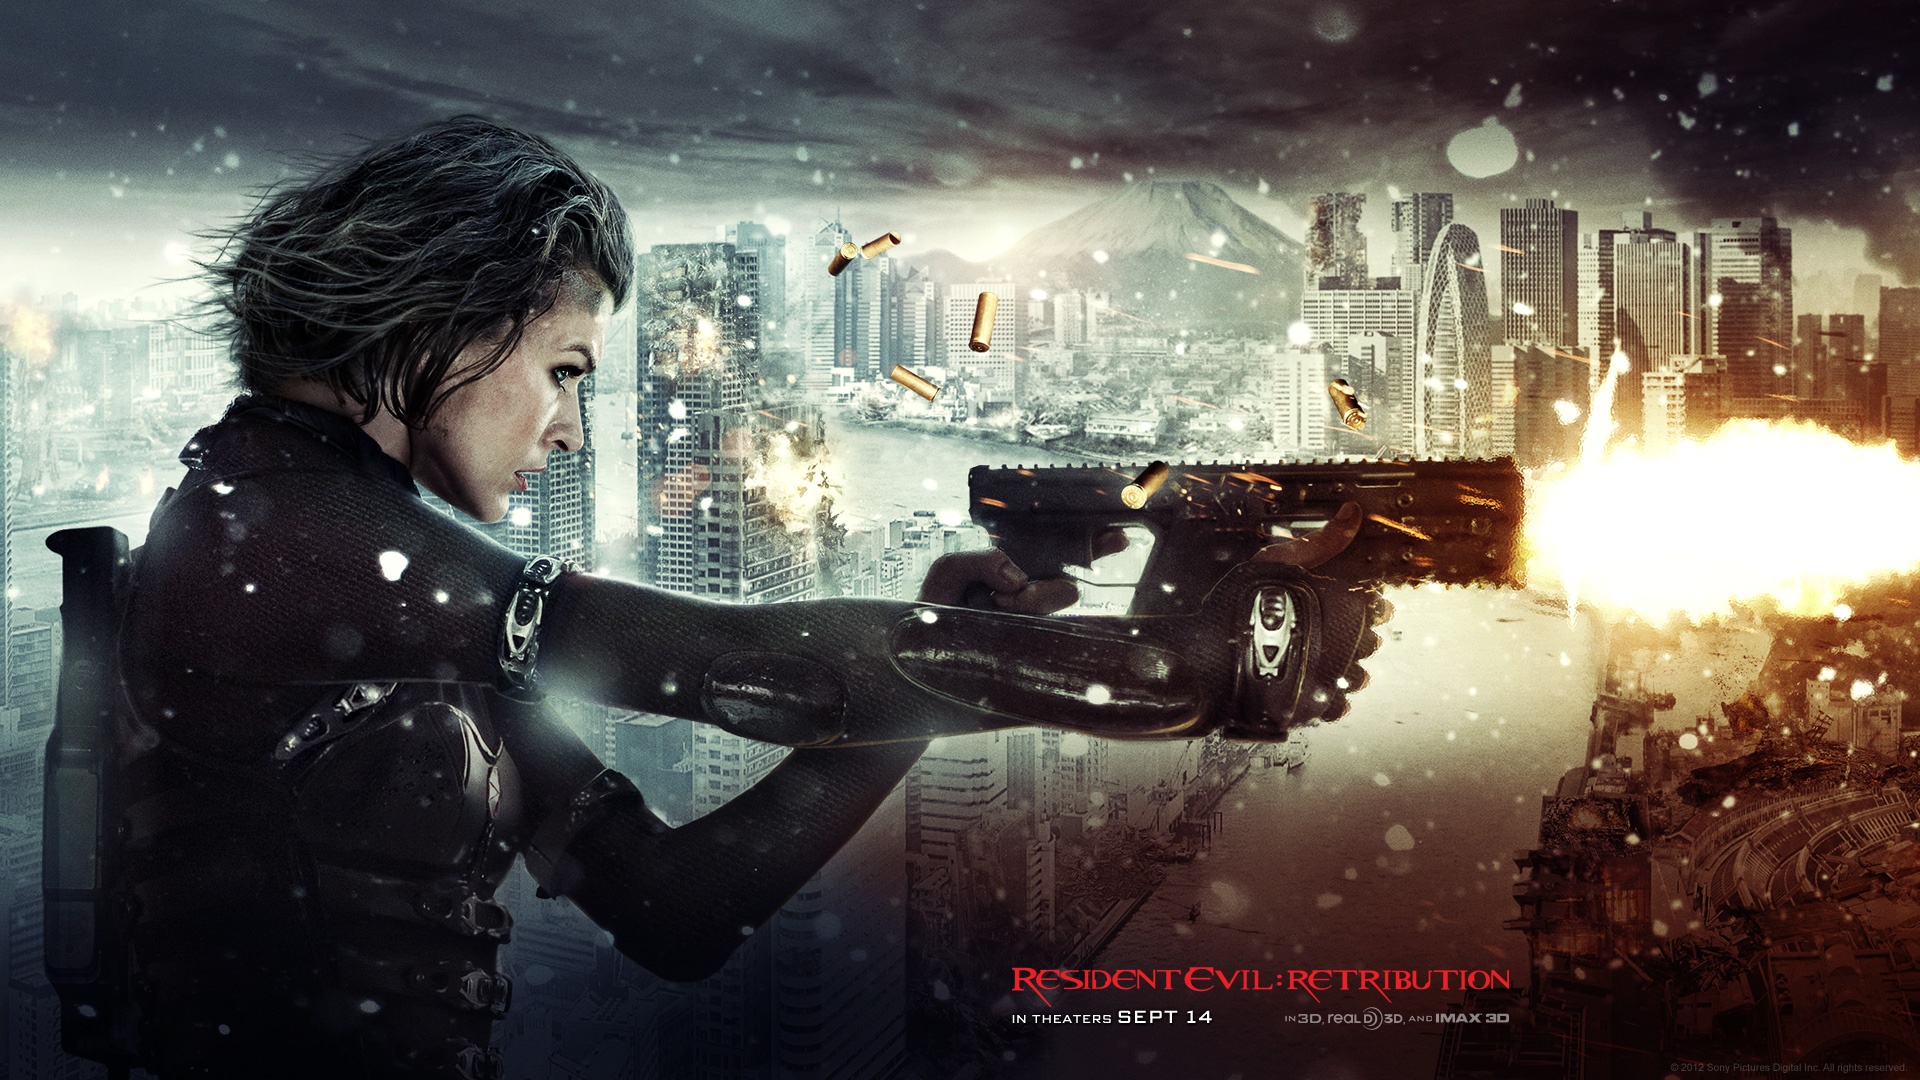 Resident Evil 5 Retribution wallpapers and images ...